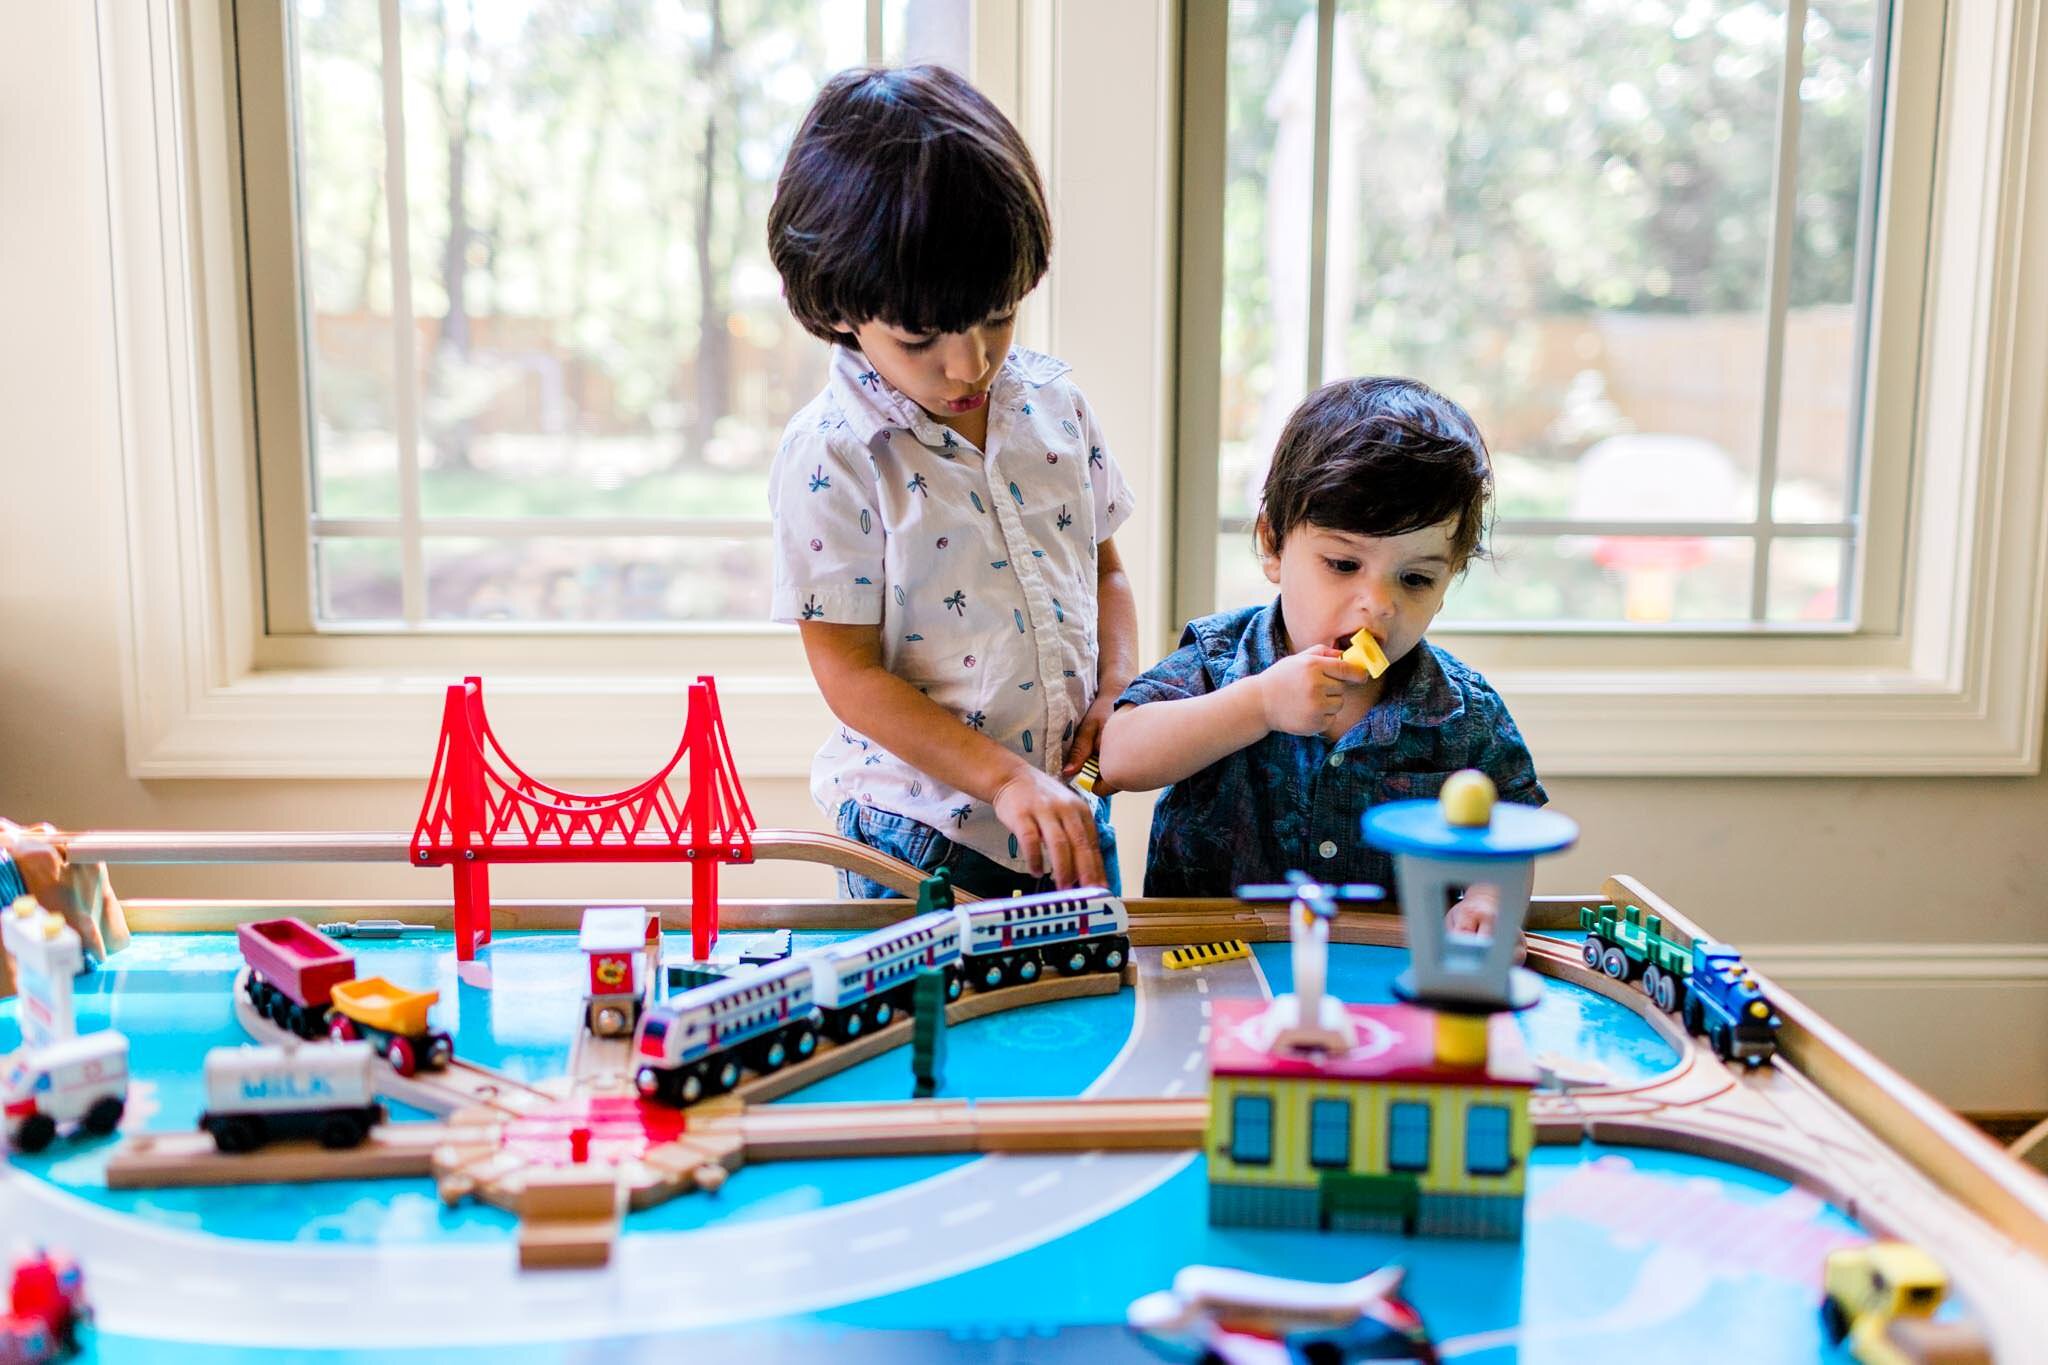 Durham Family Photographer | By G. Lin Photography | Young brothers playing with train set